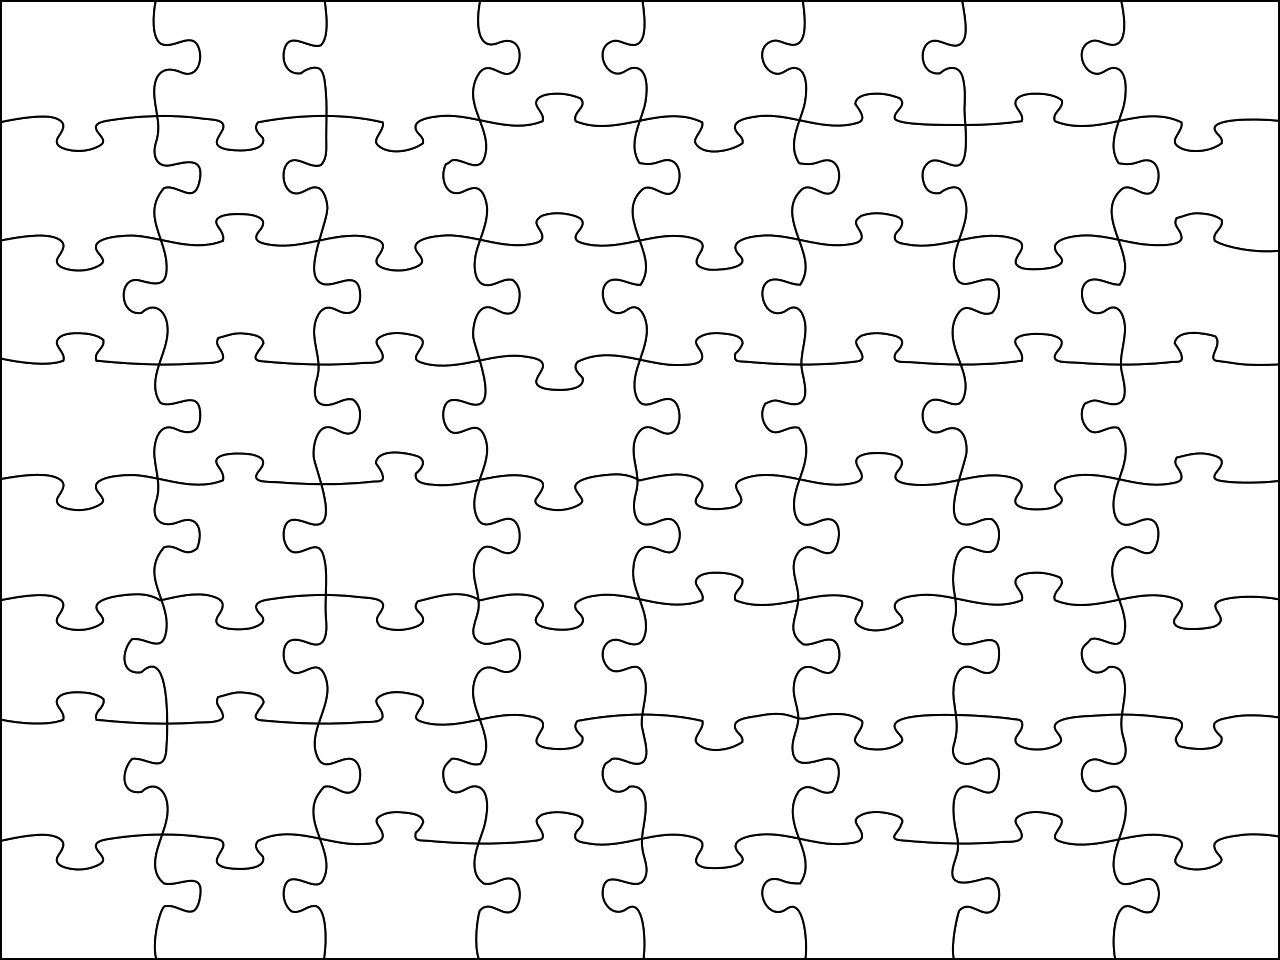 Jigsaw Puzzle Maker Free Printable | Free Printables - Printable Jigsaw Puzzle Generator